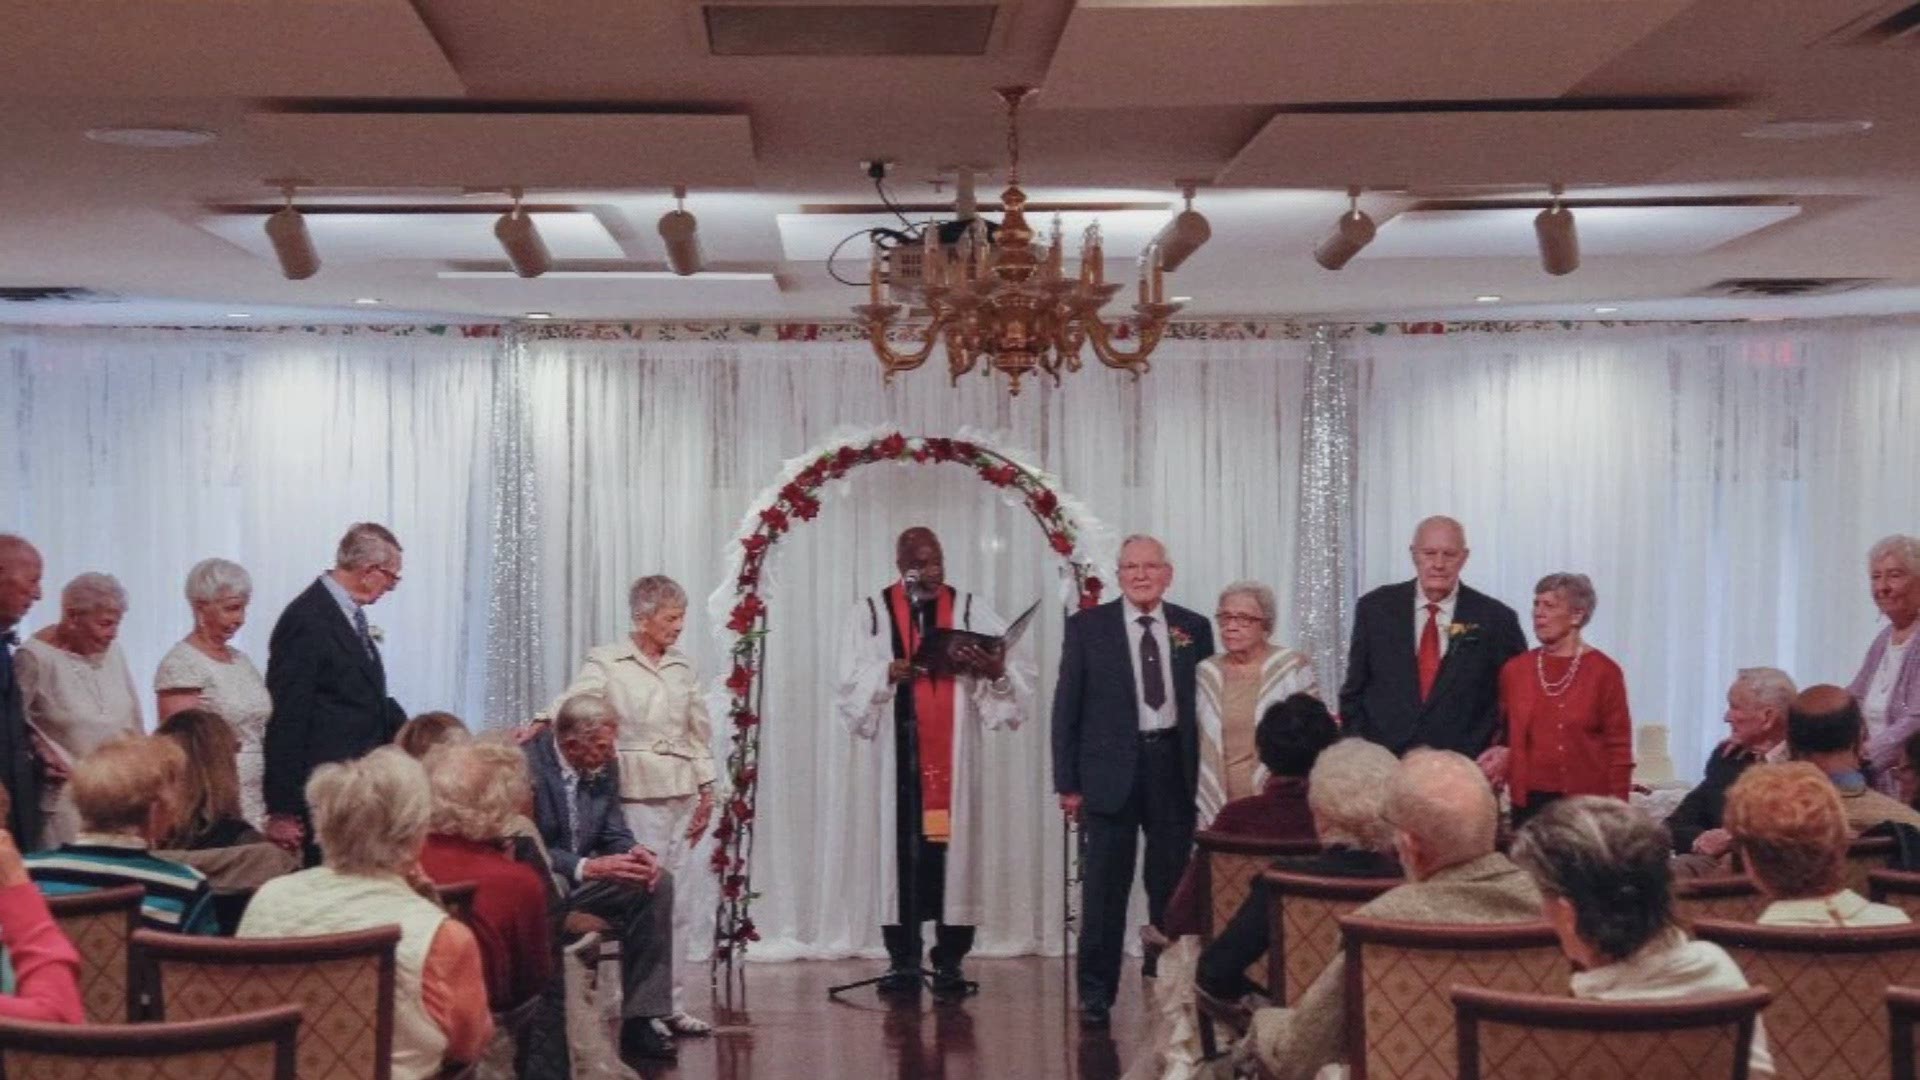 Seven couples in their 80's and 90's renewed their wedding vows ahead of Valentine's Day.